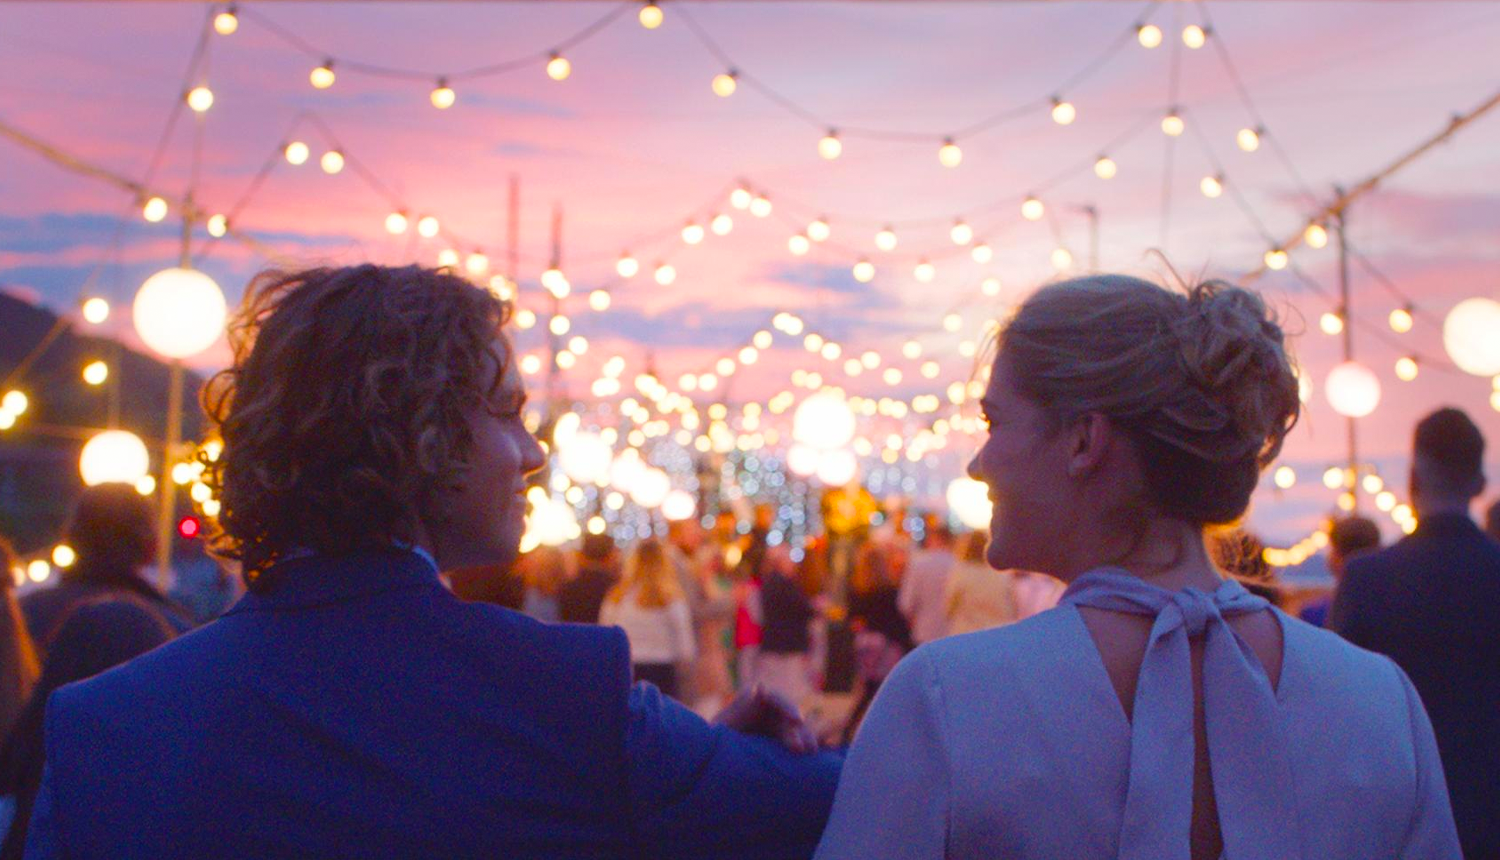 FINDING YOU: Rose Reid & Jedidiah Goodacre Star in Coming-of-Age Comedy 